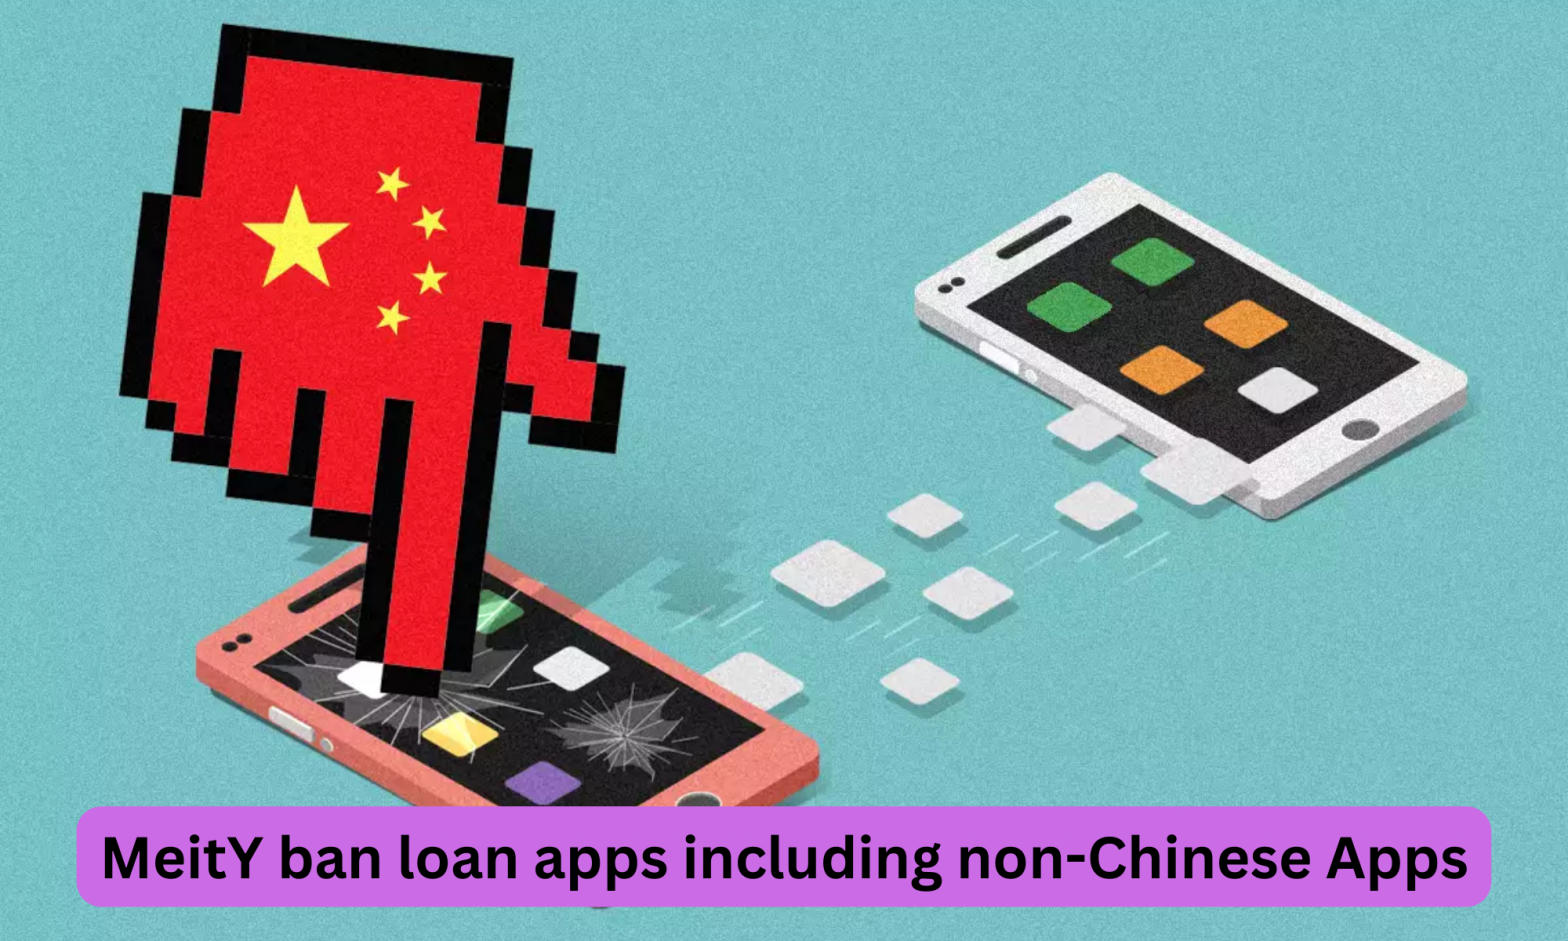 MeitY ban loan apps including non-Chinese Apps